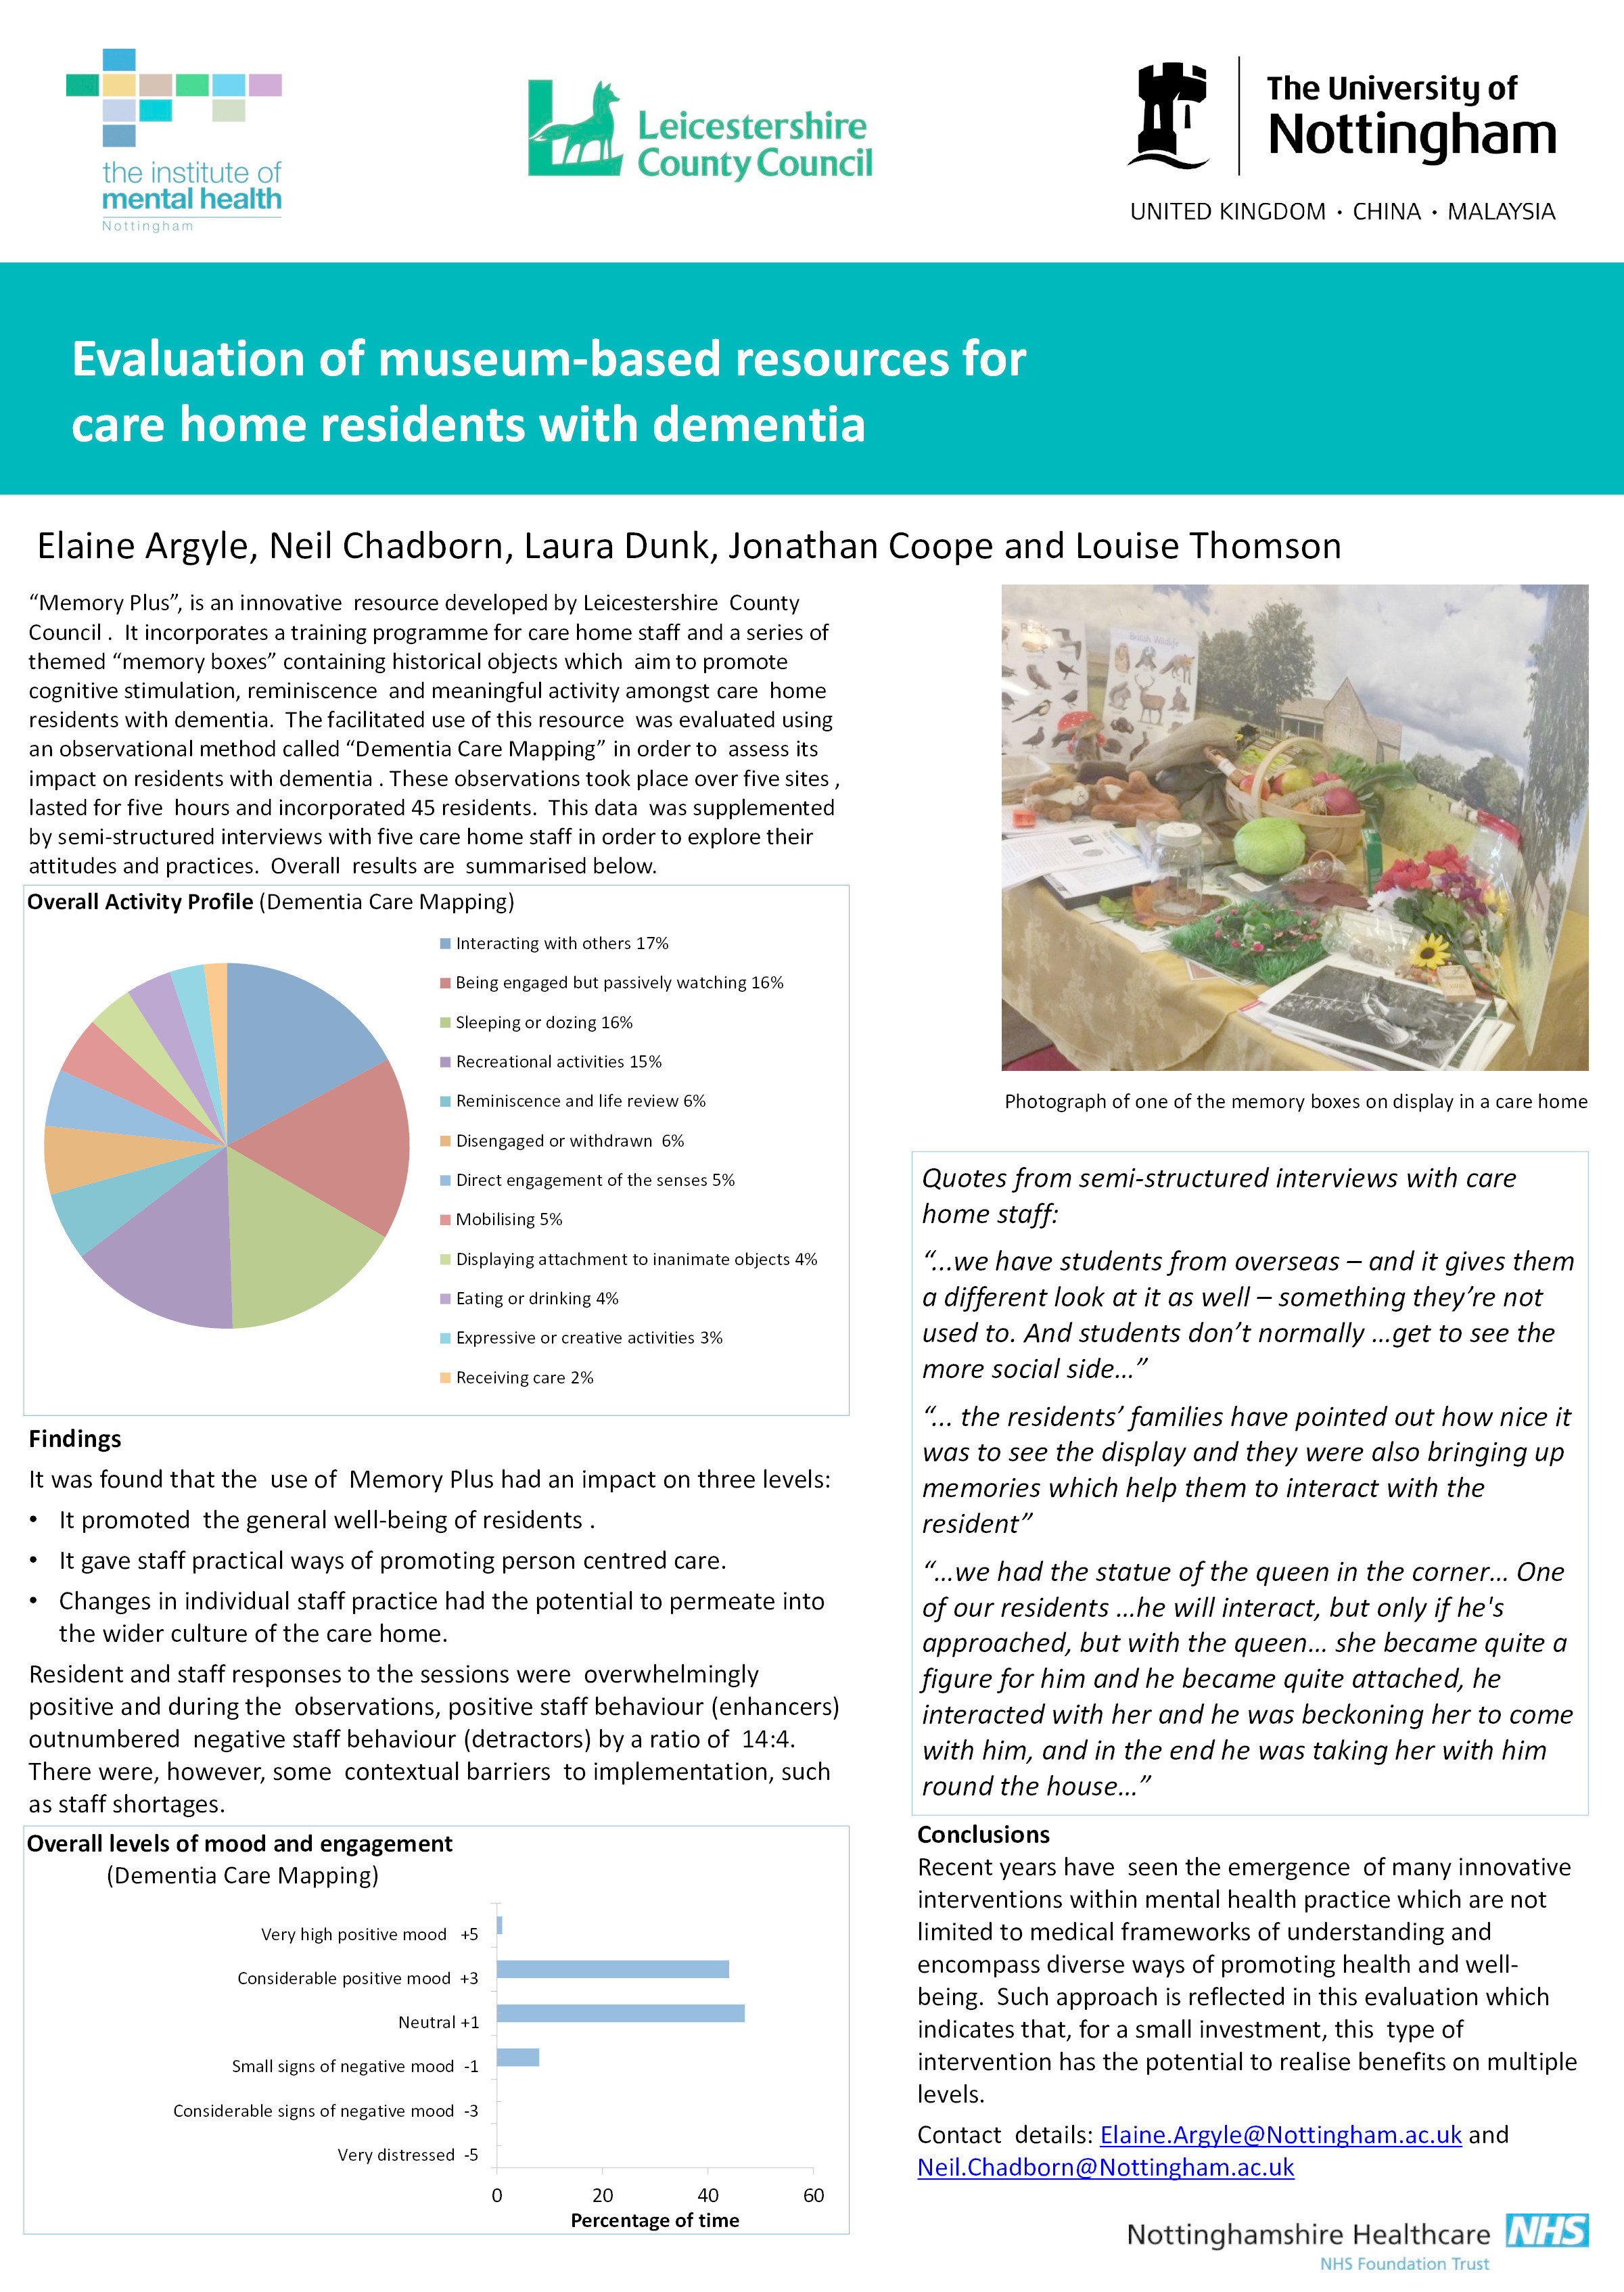 Evaluation of the use of museum based resources for care home residents with dementia Thumbnail